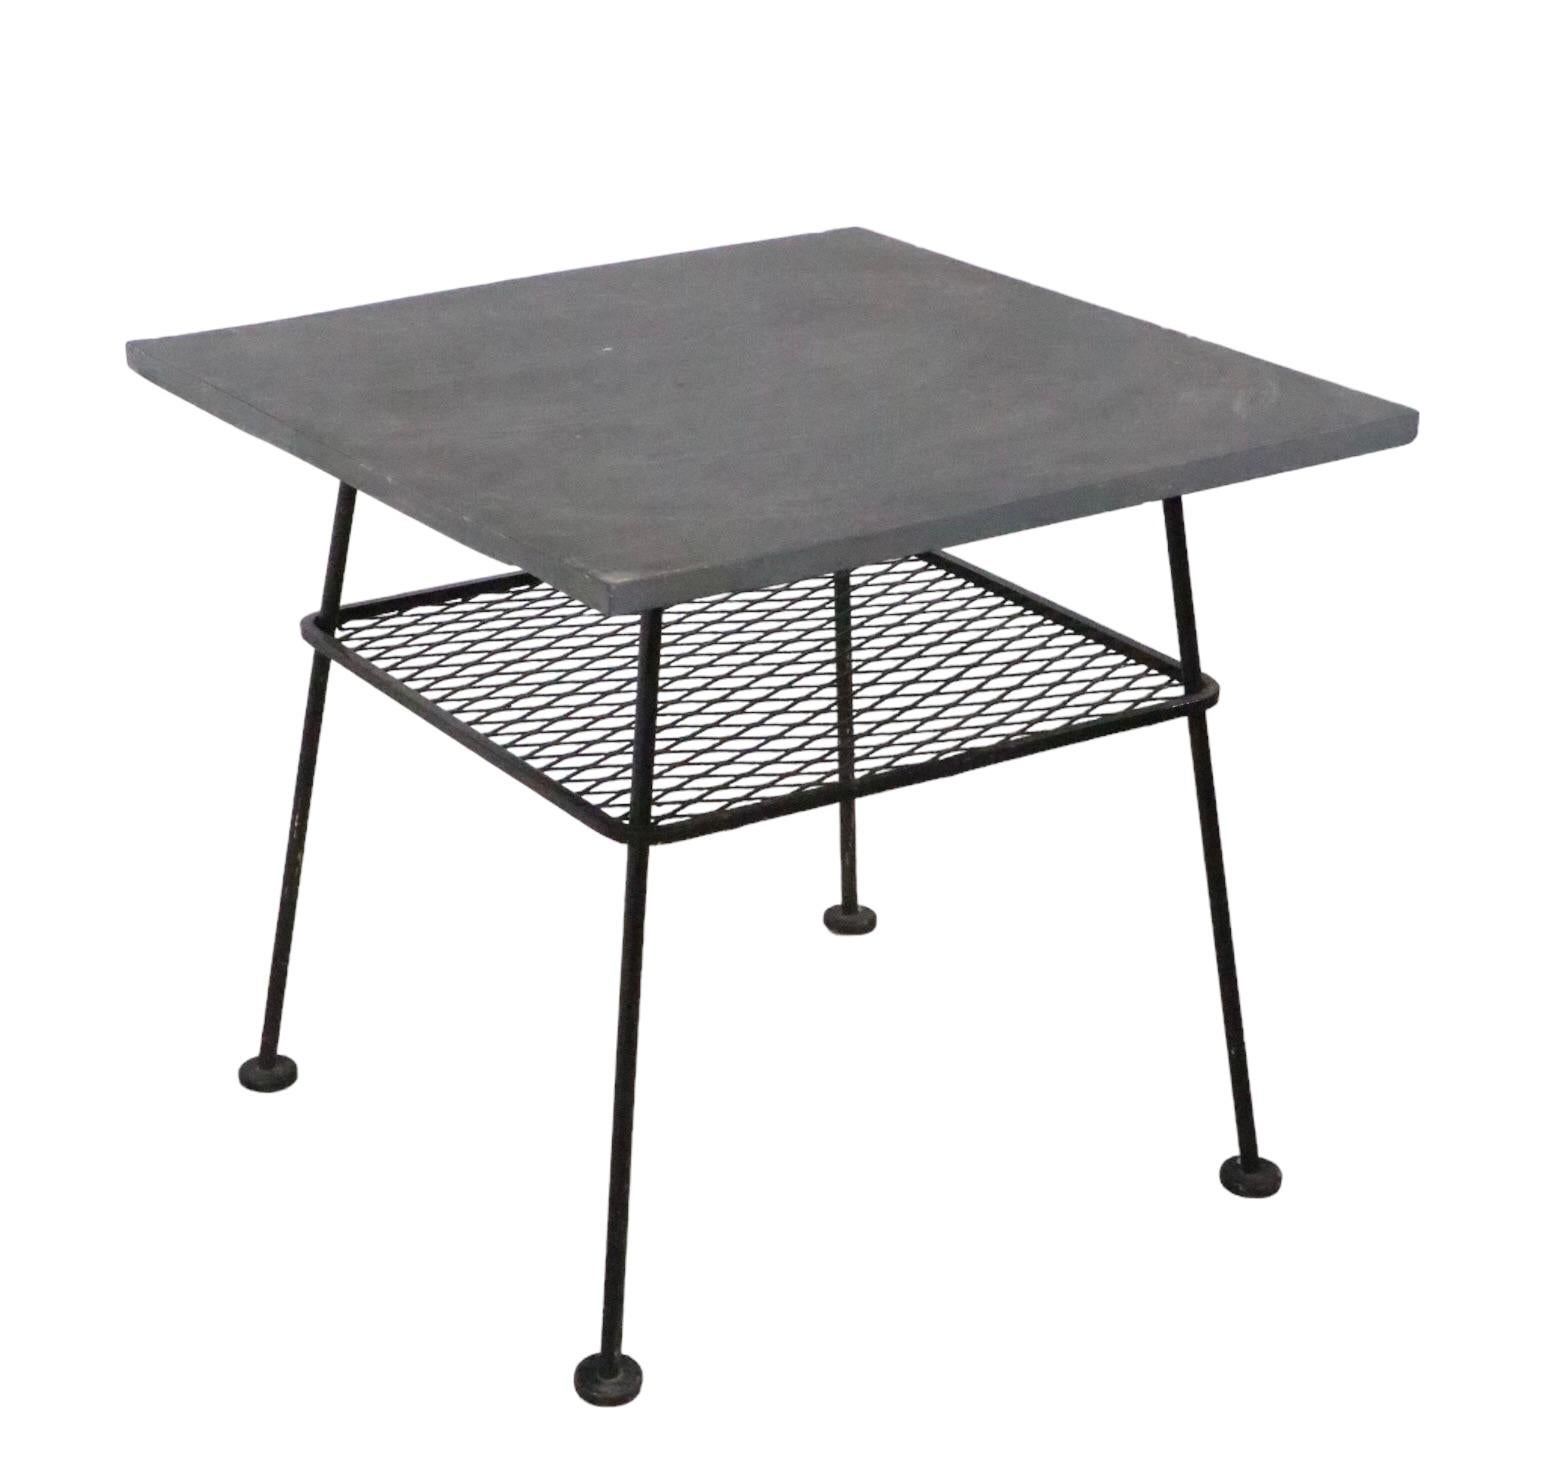 Wrought Iron and Slate Garden Patio, Sunroom Table After McCobb, Woodard, 1950s For Sale 4